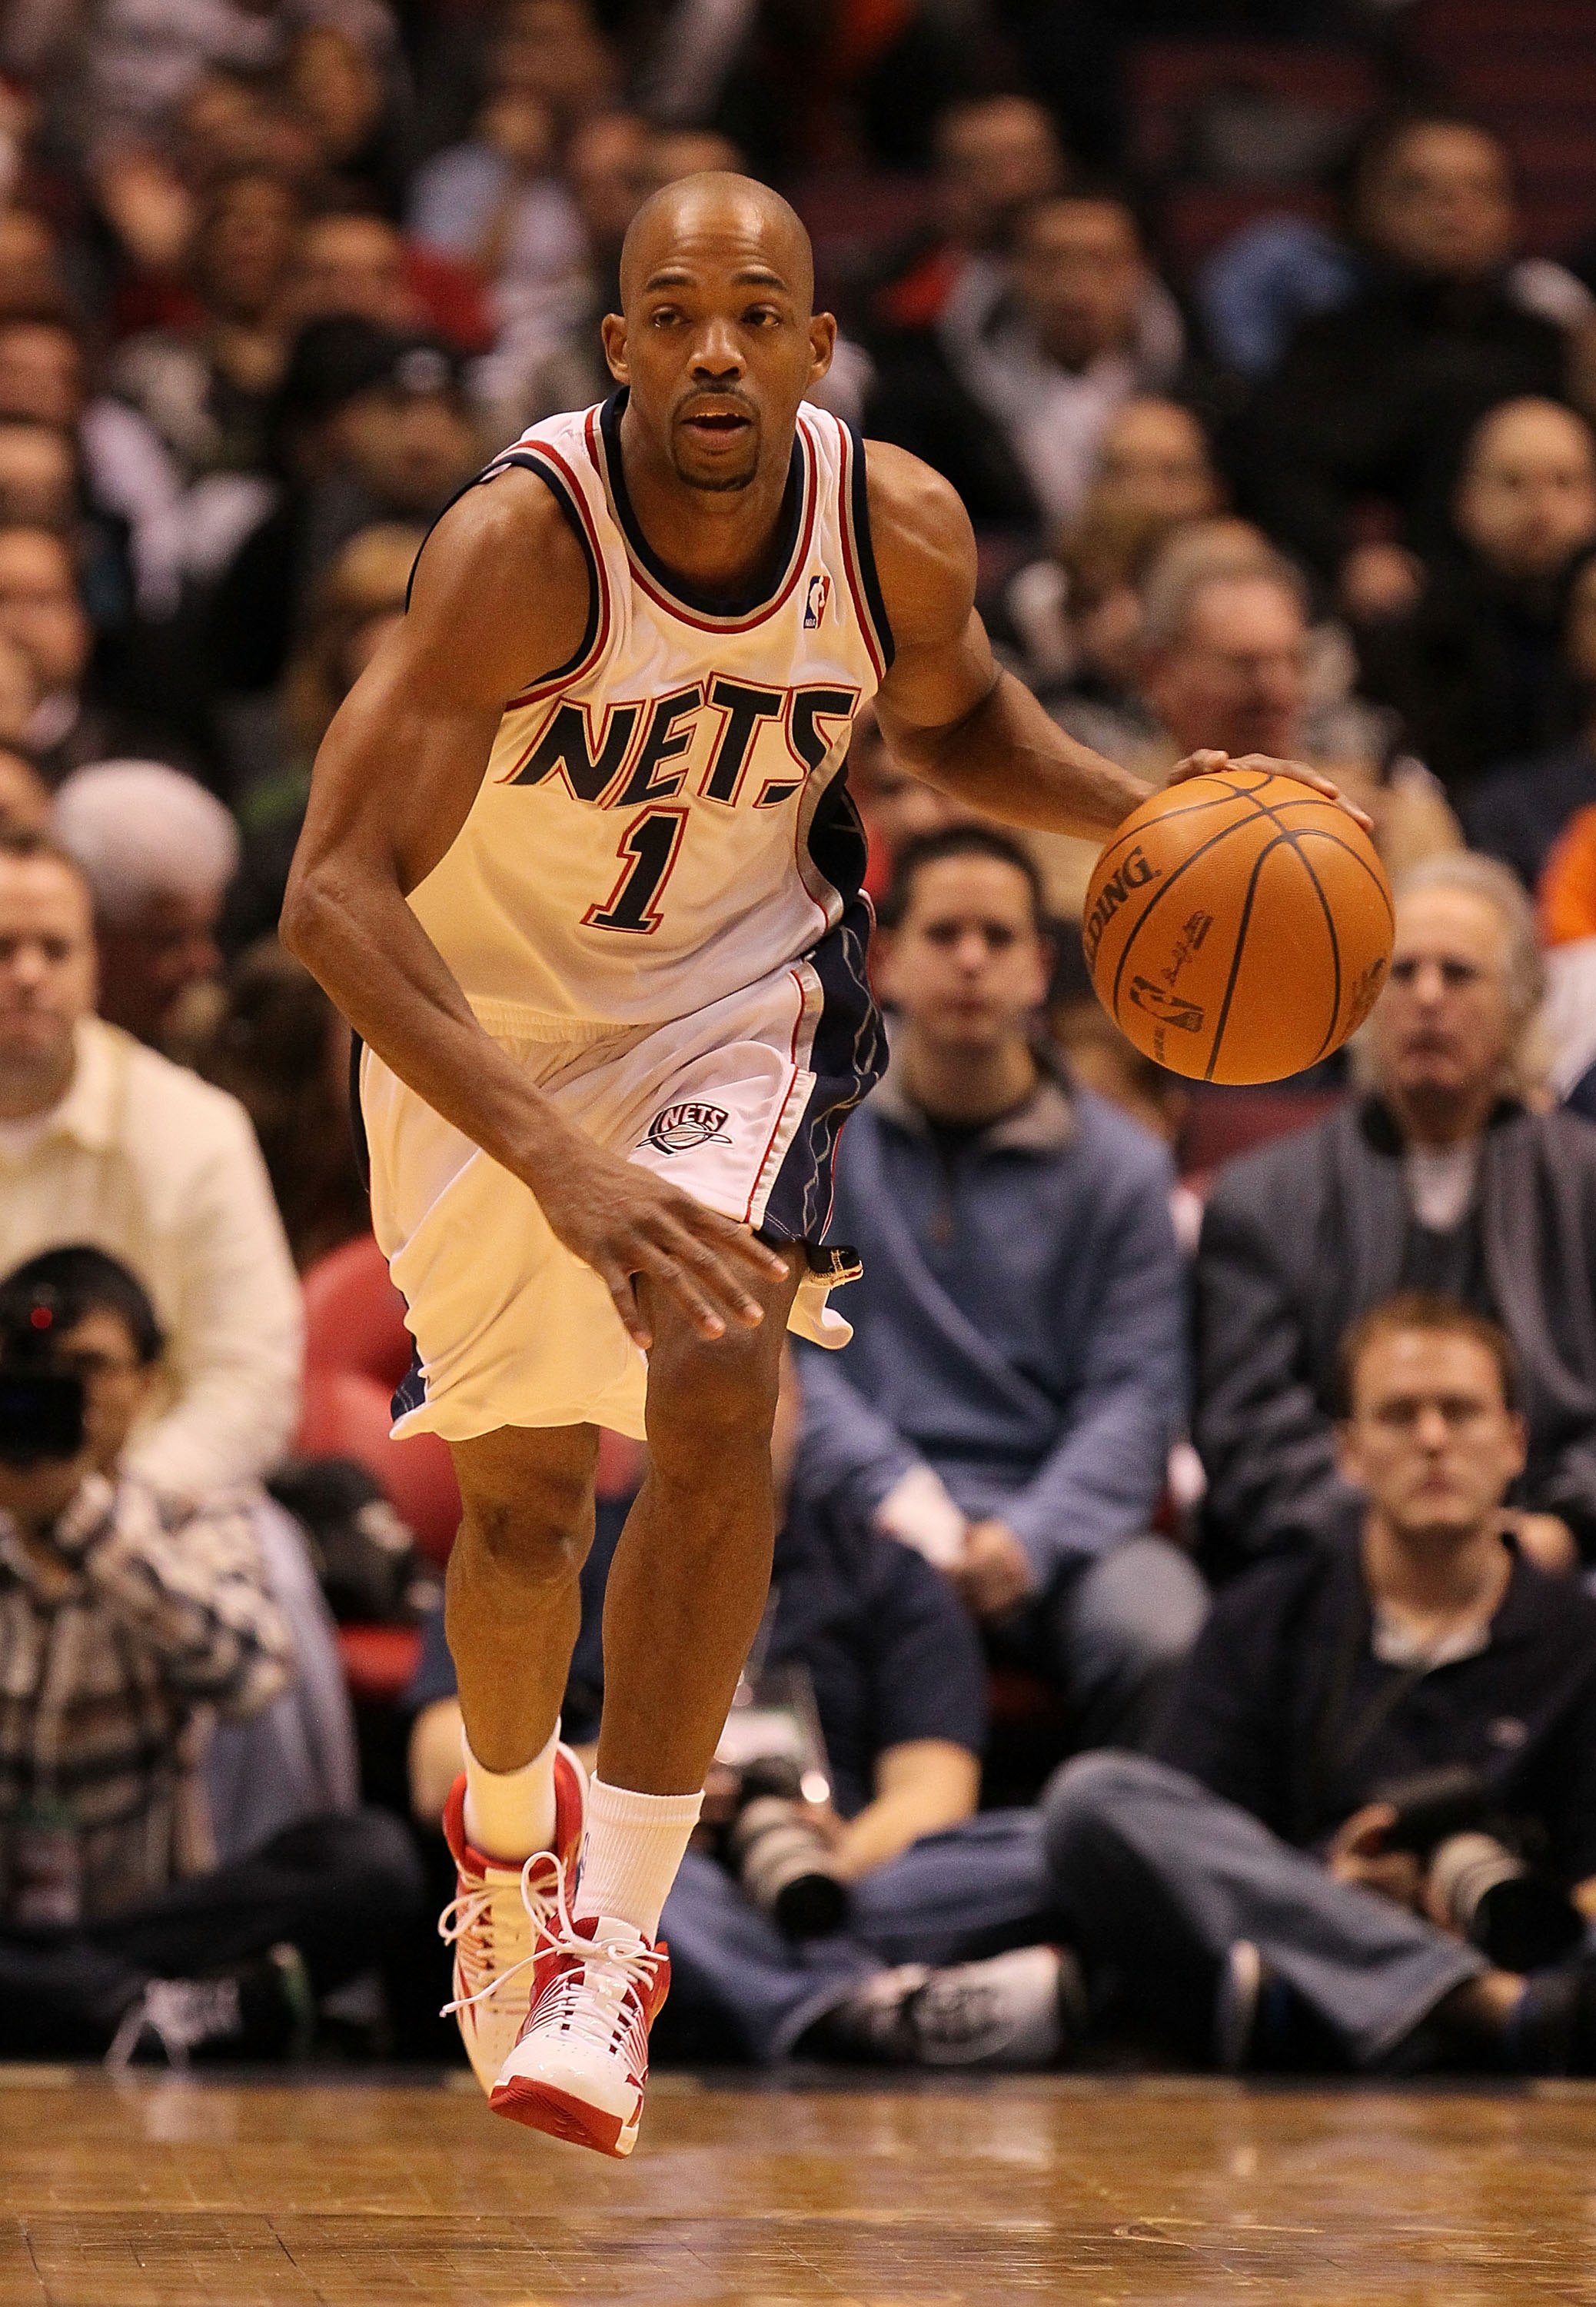 EAST RUTHERFORD, NJ - DECEMBER 16:  Rafer Alston #1 of the New Jersey Nets in action against The Utah Jazz during their game on December 16th, 2009 at The Izod Center in East Rutherford, New Jersey.  NOTE TO USER: User expressly acknowledges and agrees th